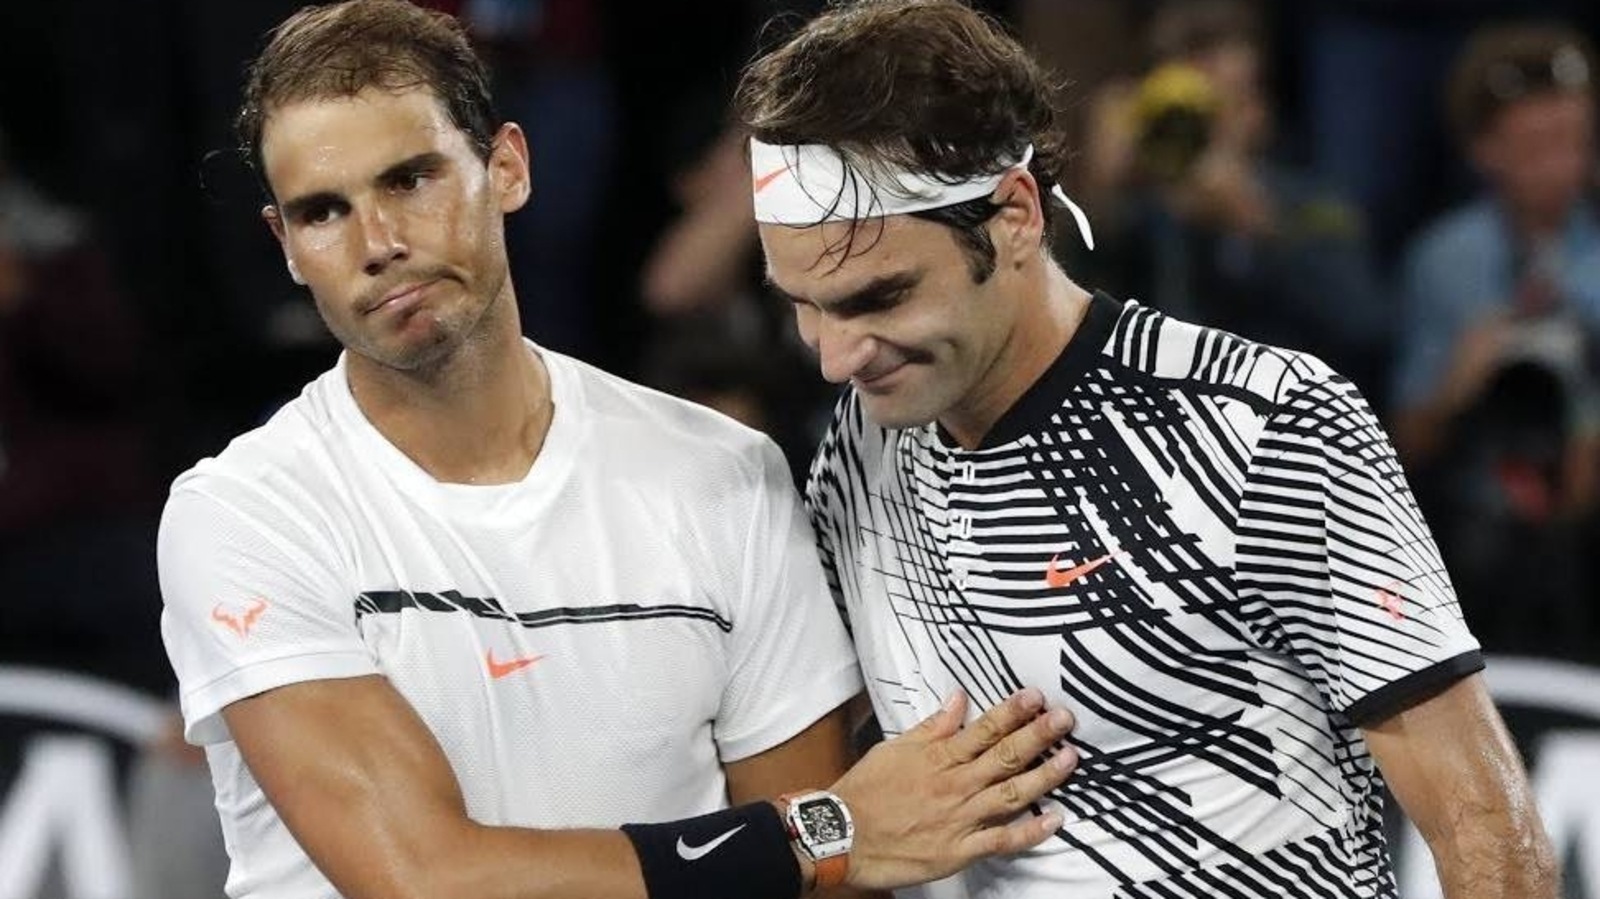 federer-nadal-may-break-incredible-record-after-swiss-legend-s-retirement-as-real-madrid-plan-one-last-fedal-battle